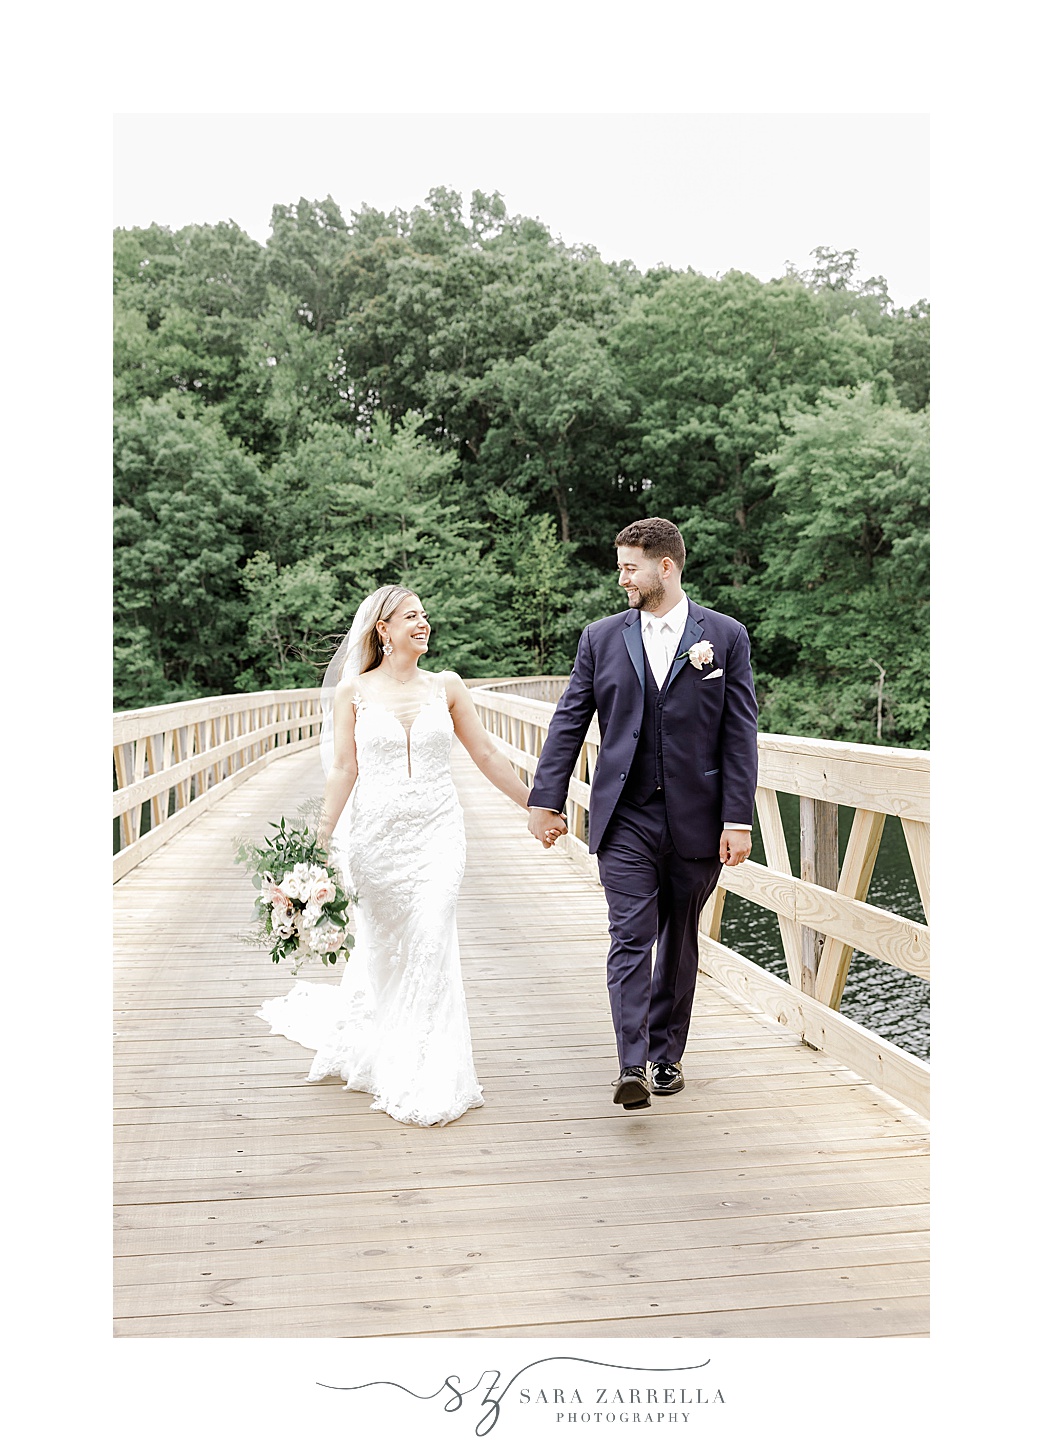 bride and groom hold hands walking together on wooden path at the Lake of Isles